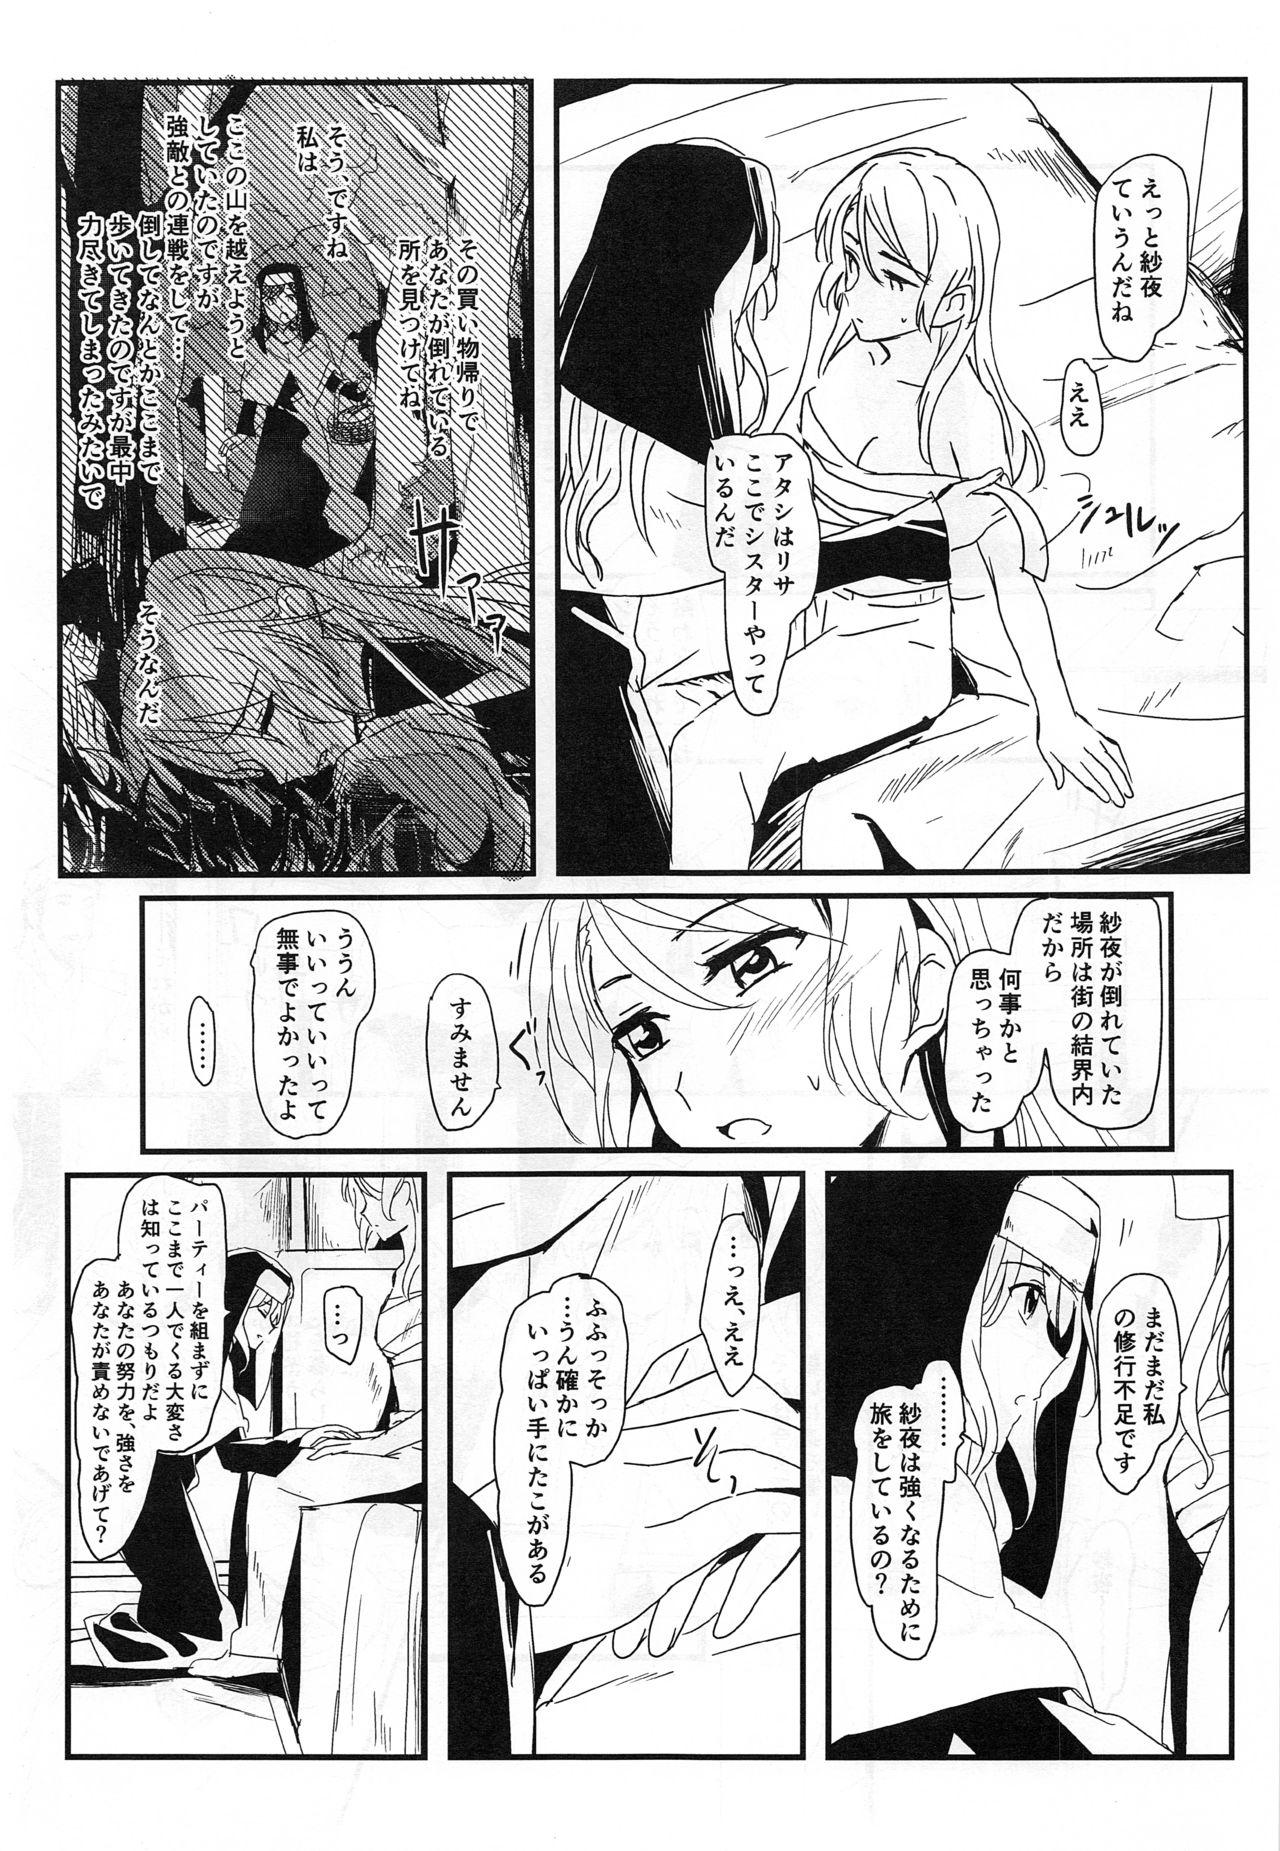 Pounded you make me! - Bang dream 8teenxxx - Page 6